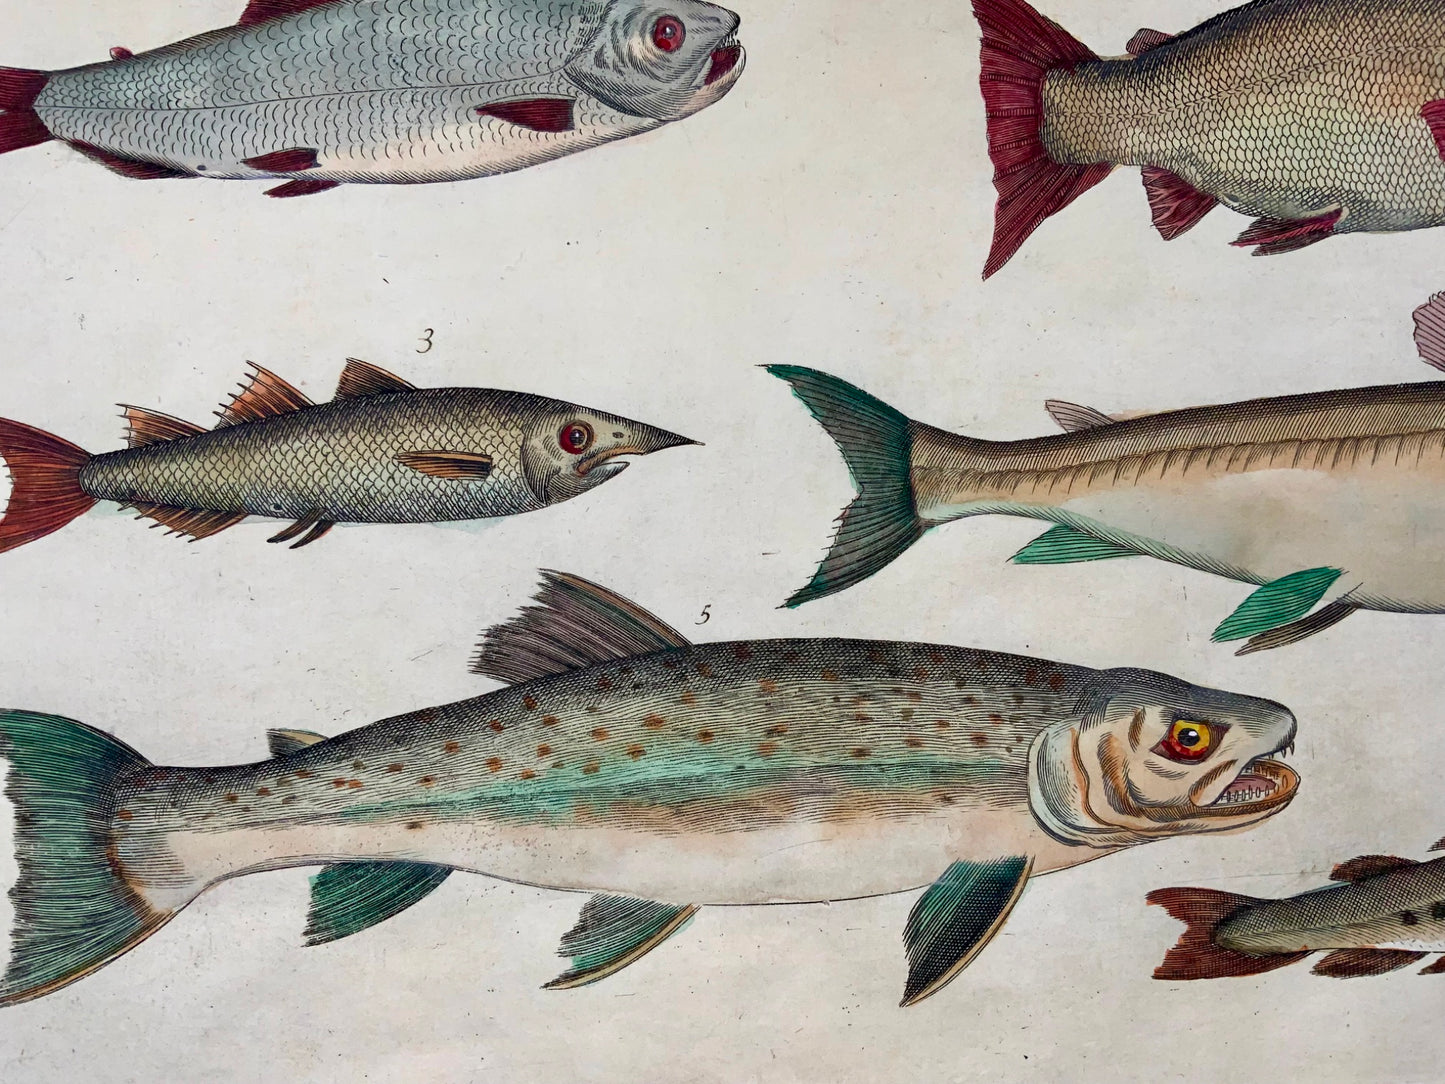 1686 Trout, Salmon, Somer after Silviani, Fish folio copper engraving